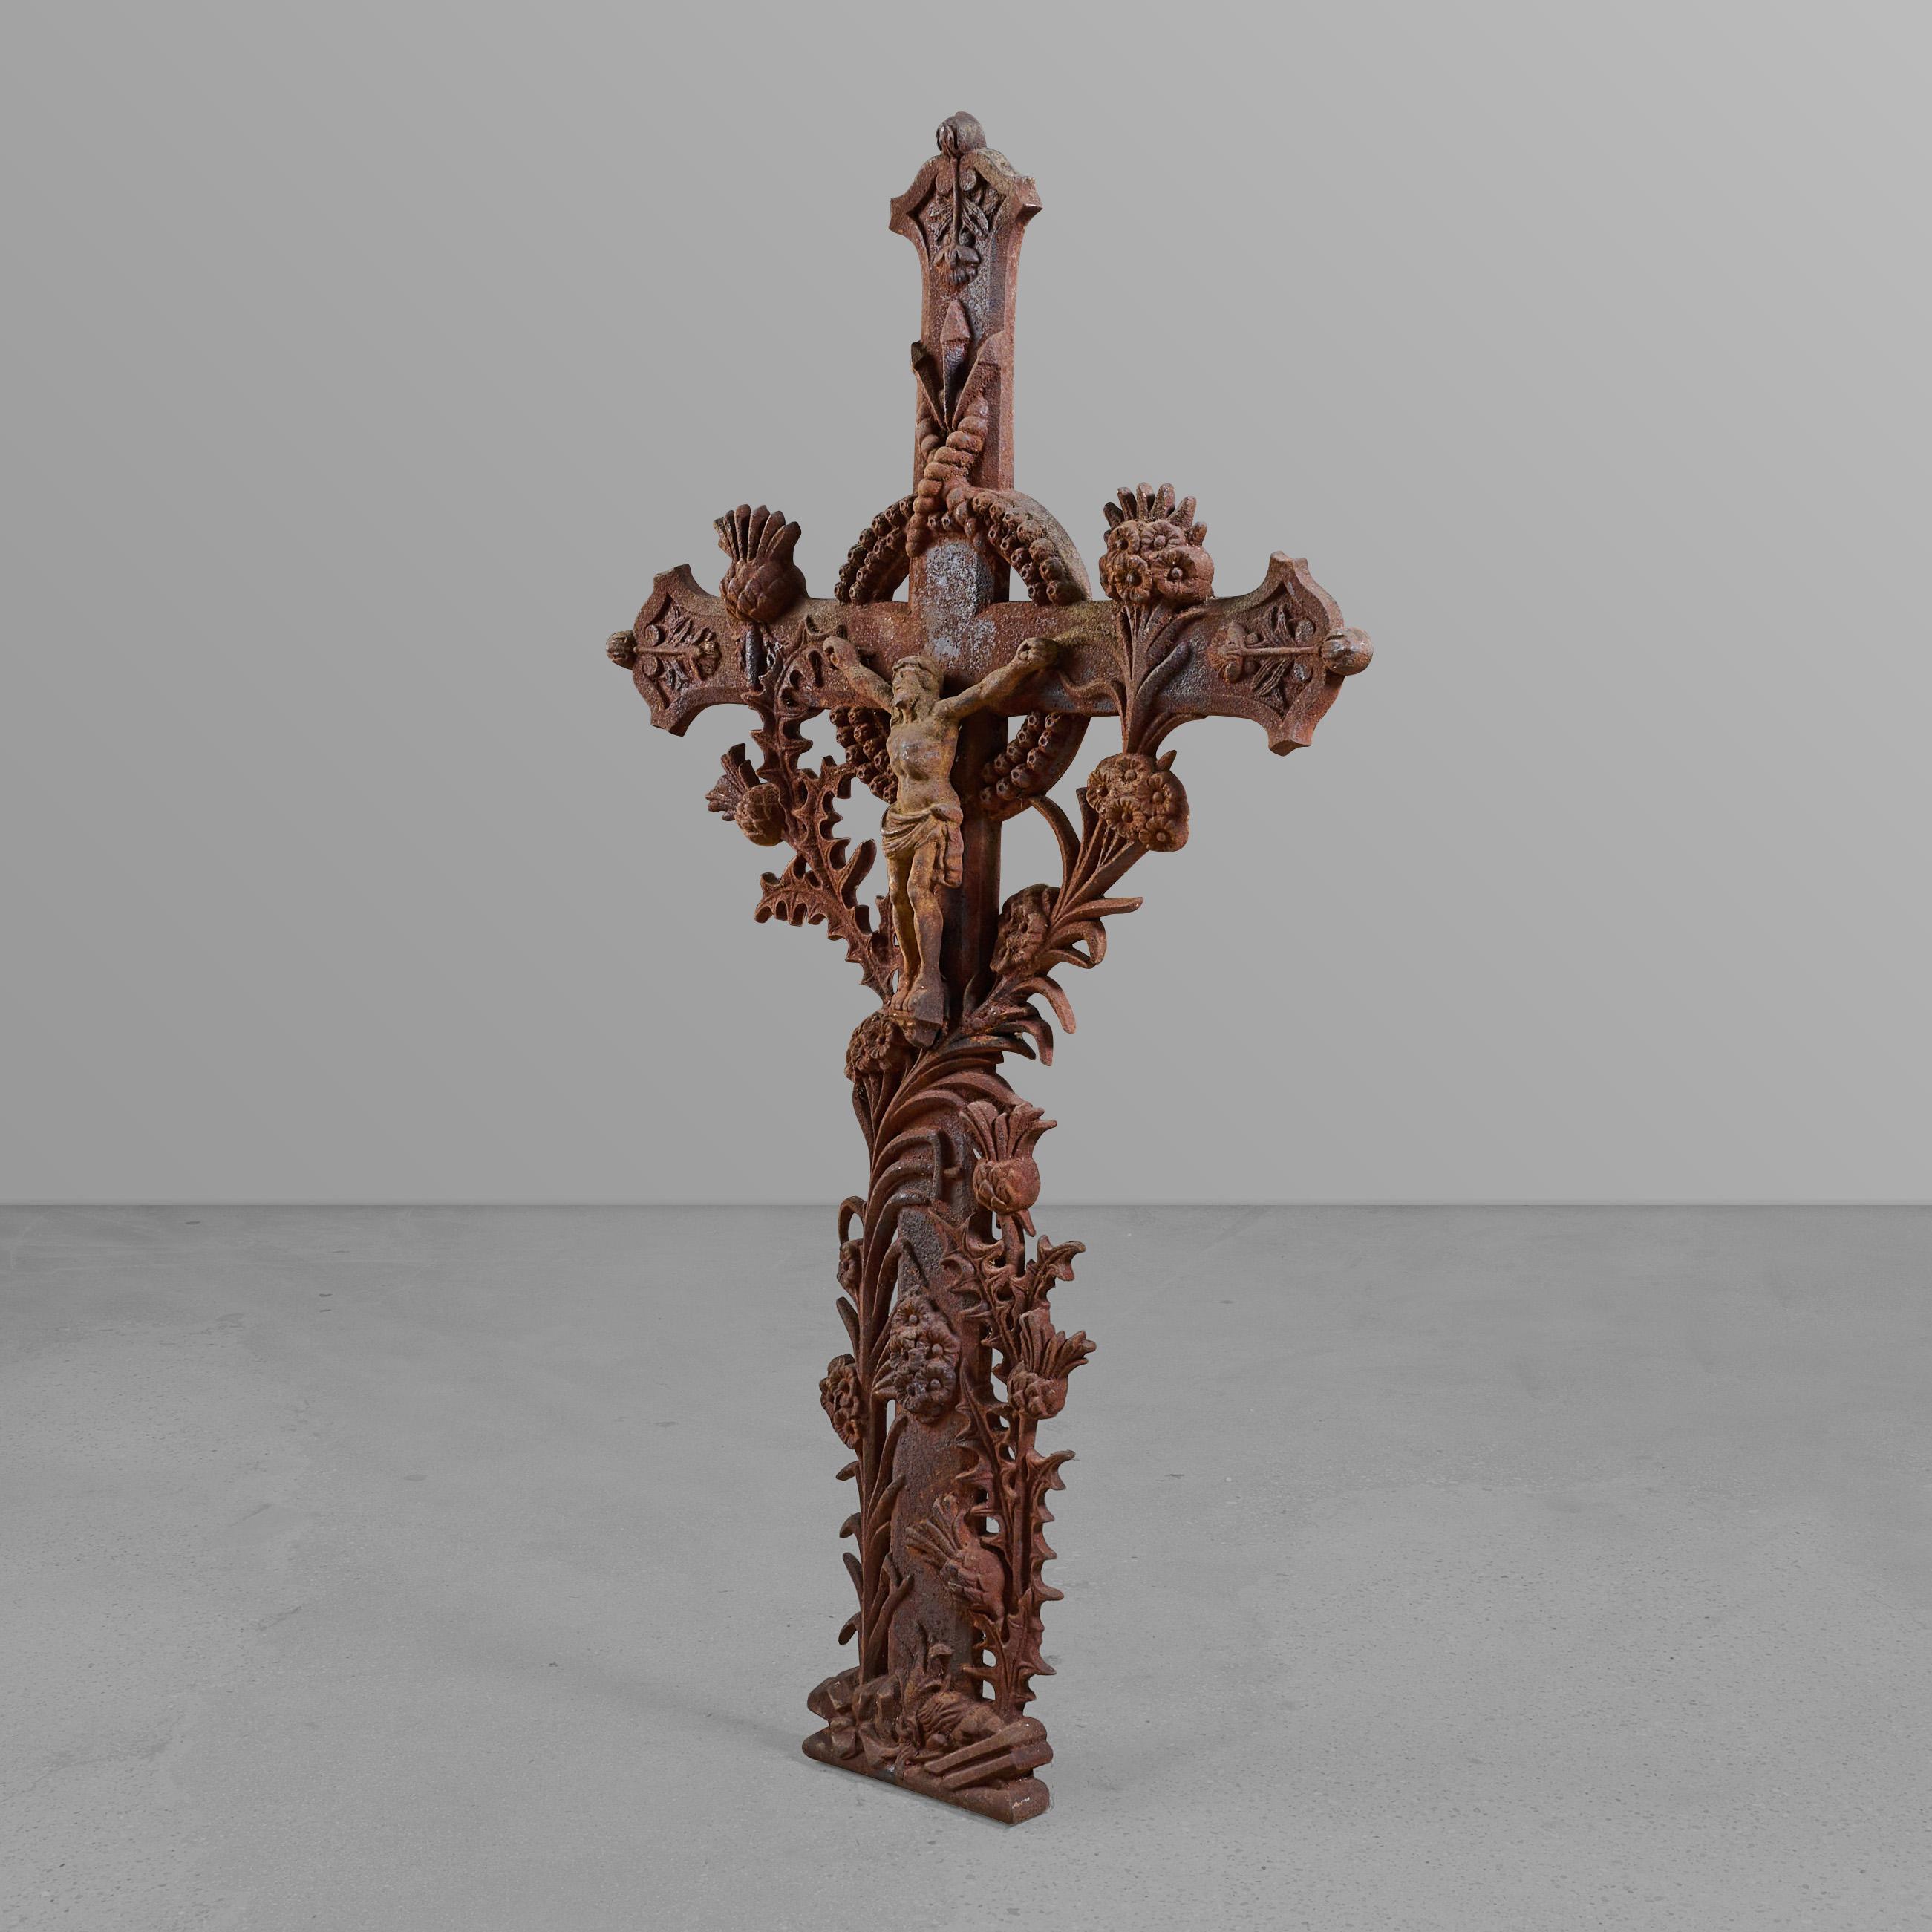 Cast iron crucifix with original patina. Great casting and quality.

